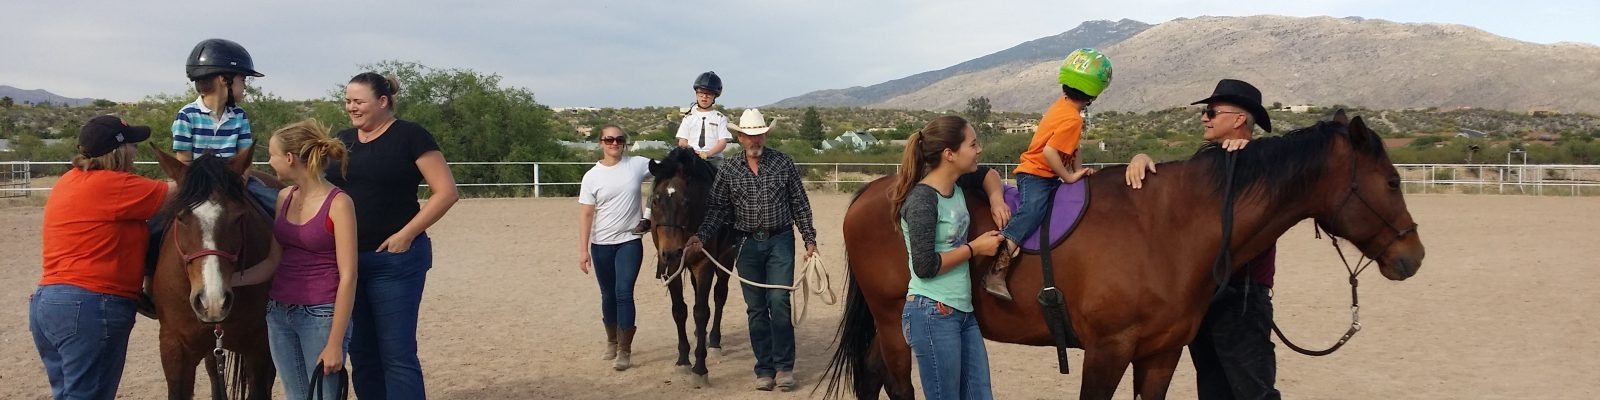 Angels in Autism Corral: People riding horses